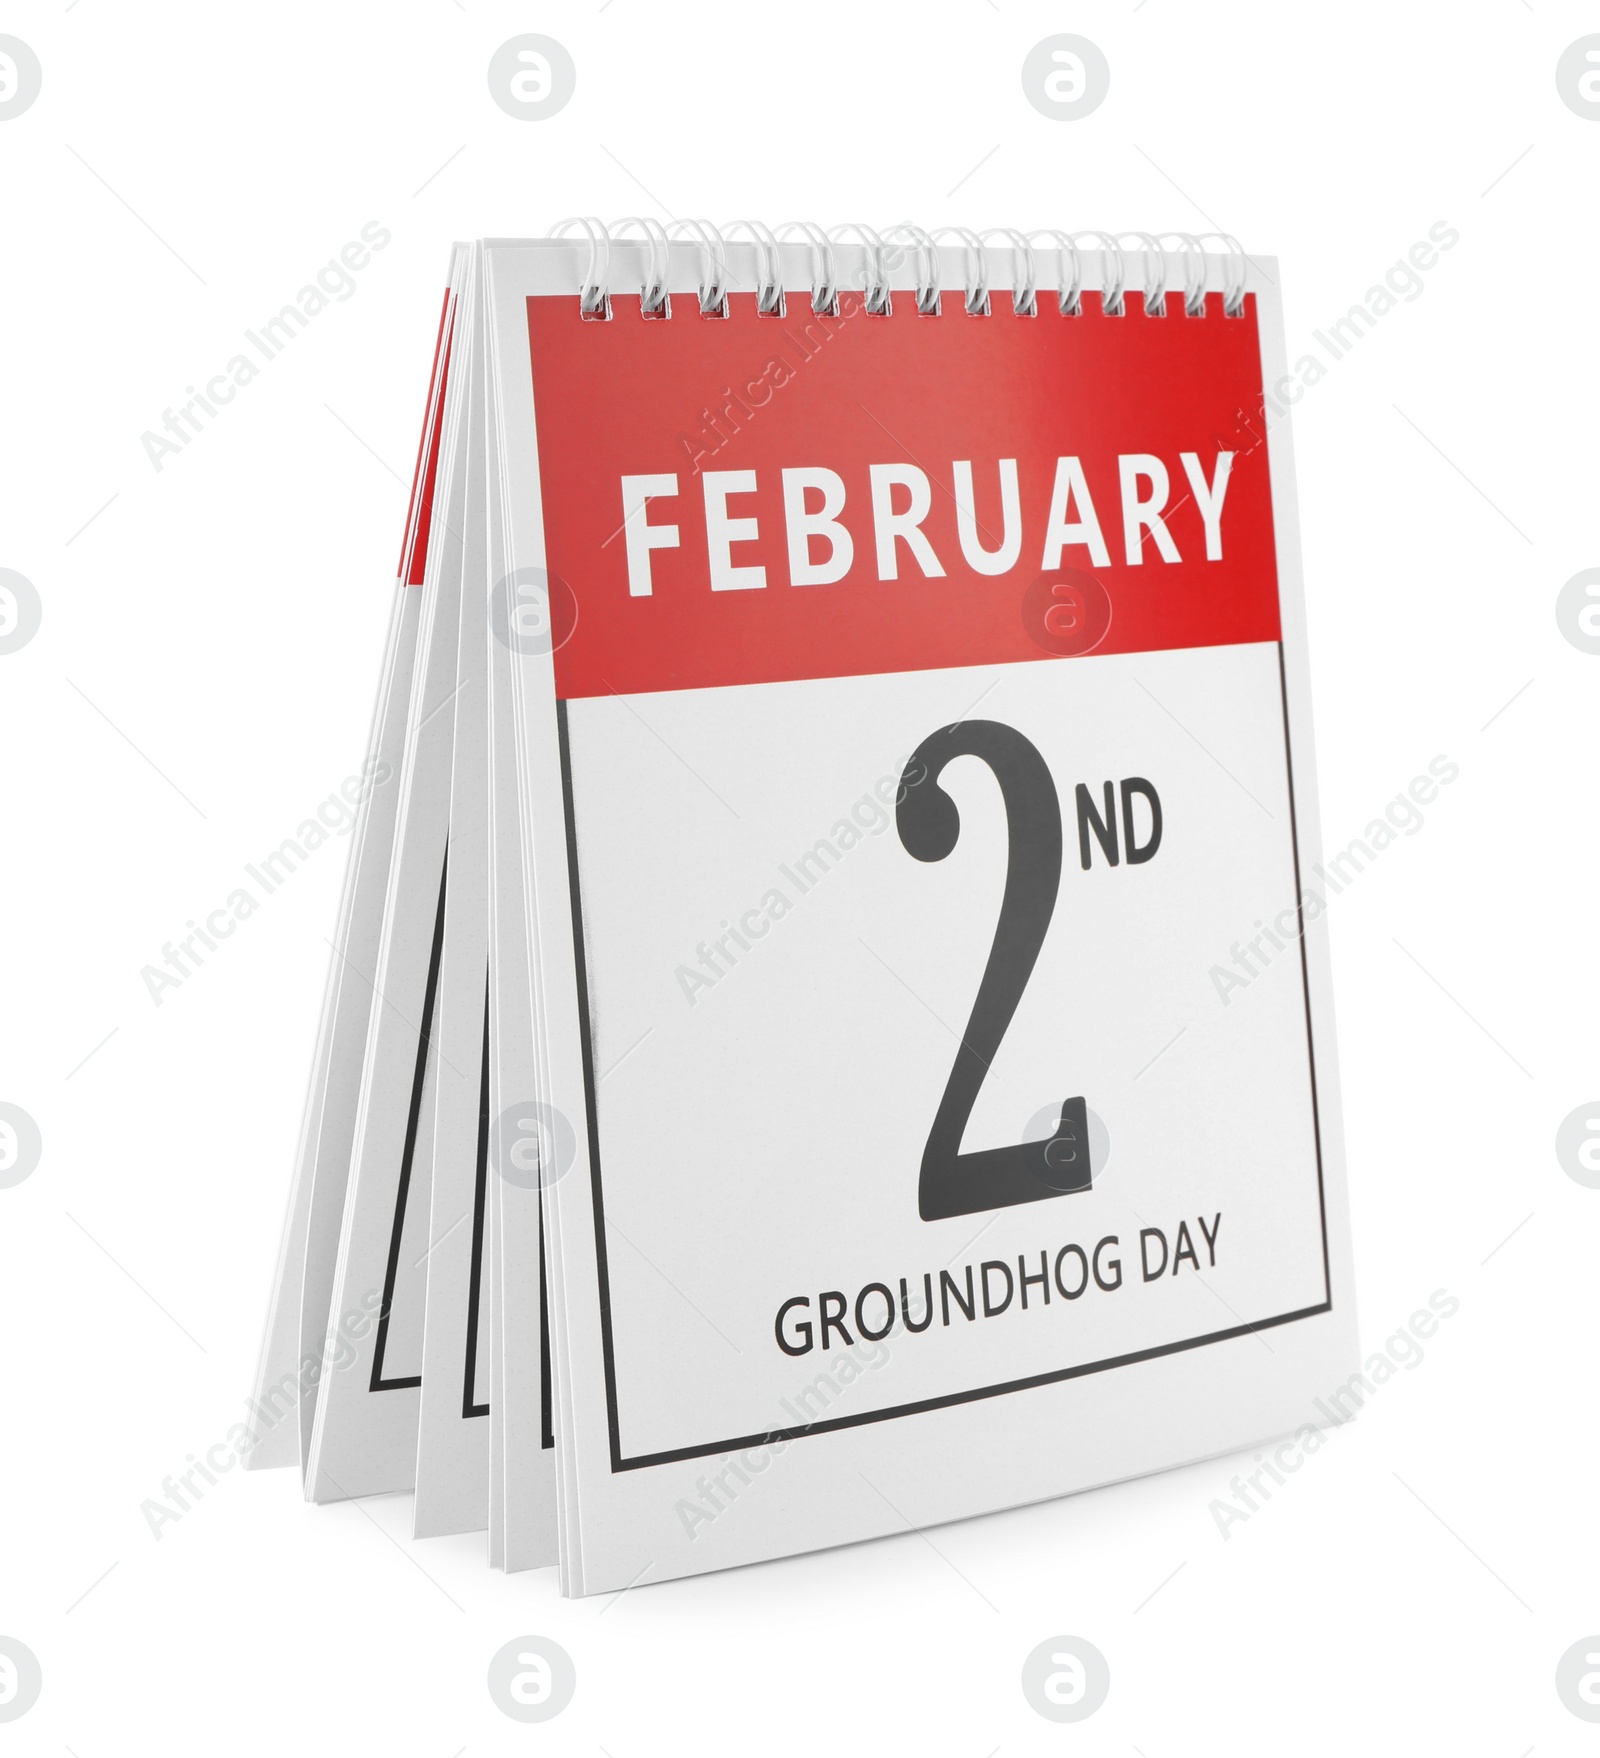 Photo of Calendar with date February 2nd on white background. Groundhog day